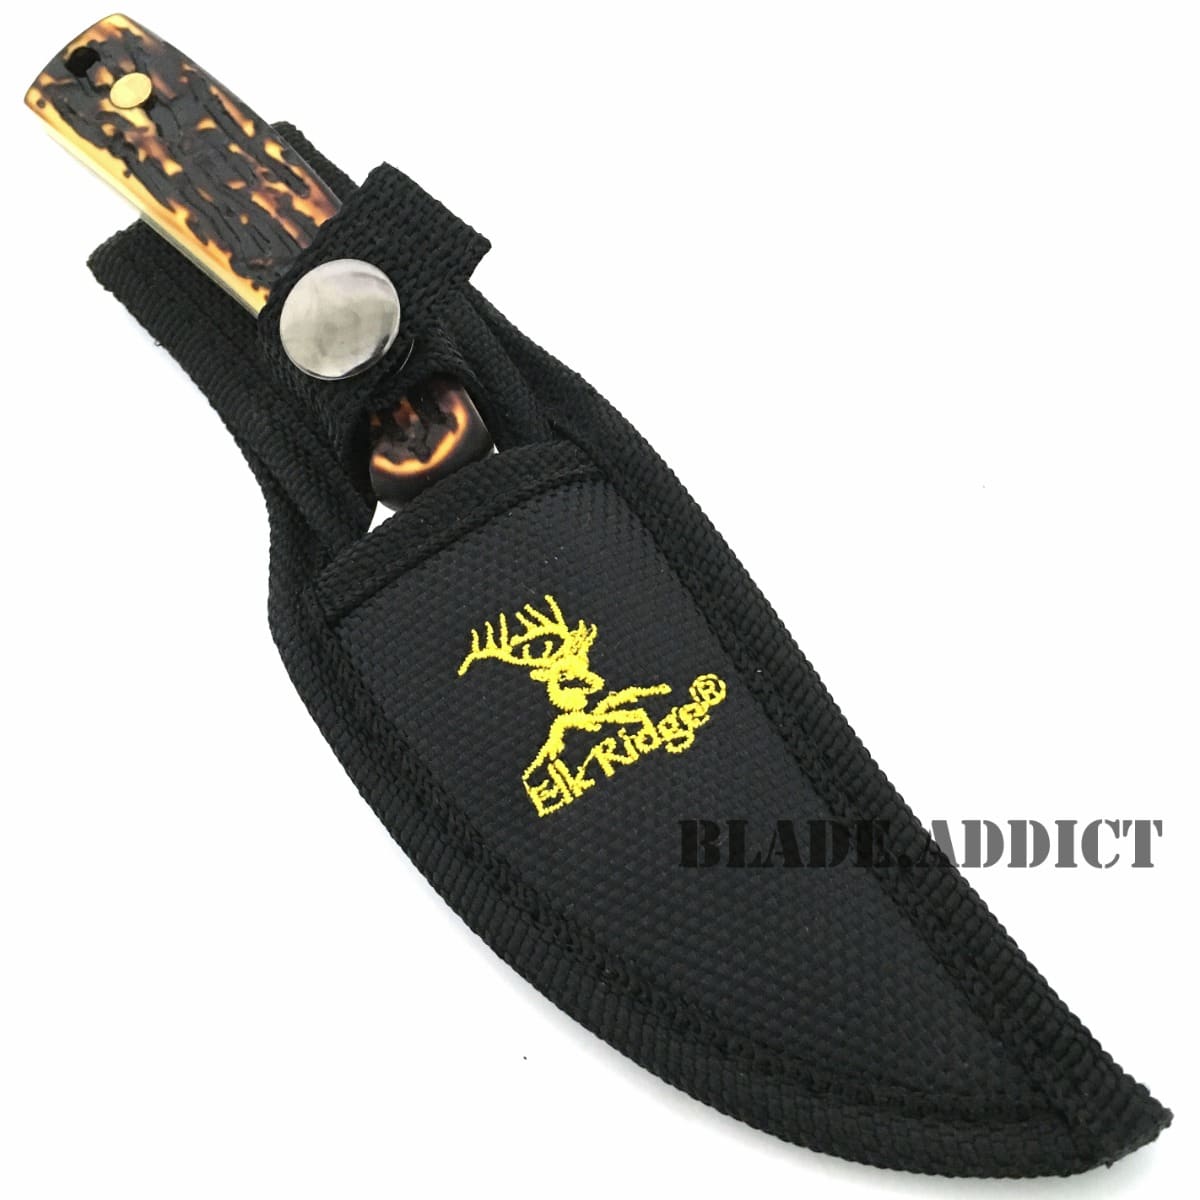 7" STAG TACTICAL SURVIVAL Skinning KNIFE Hunting Skinner Camping Fixed Blade